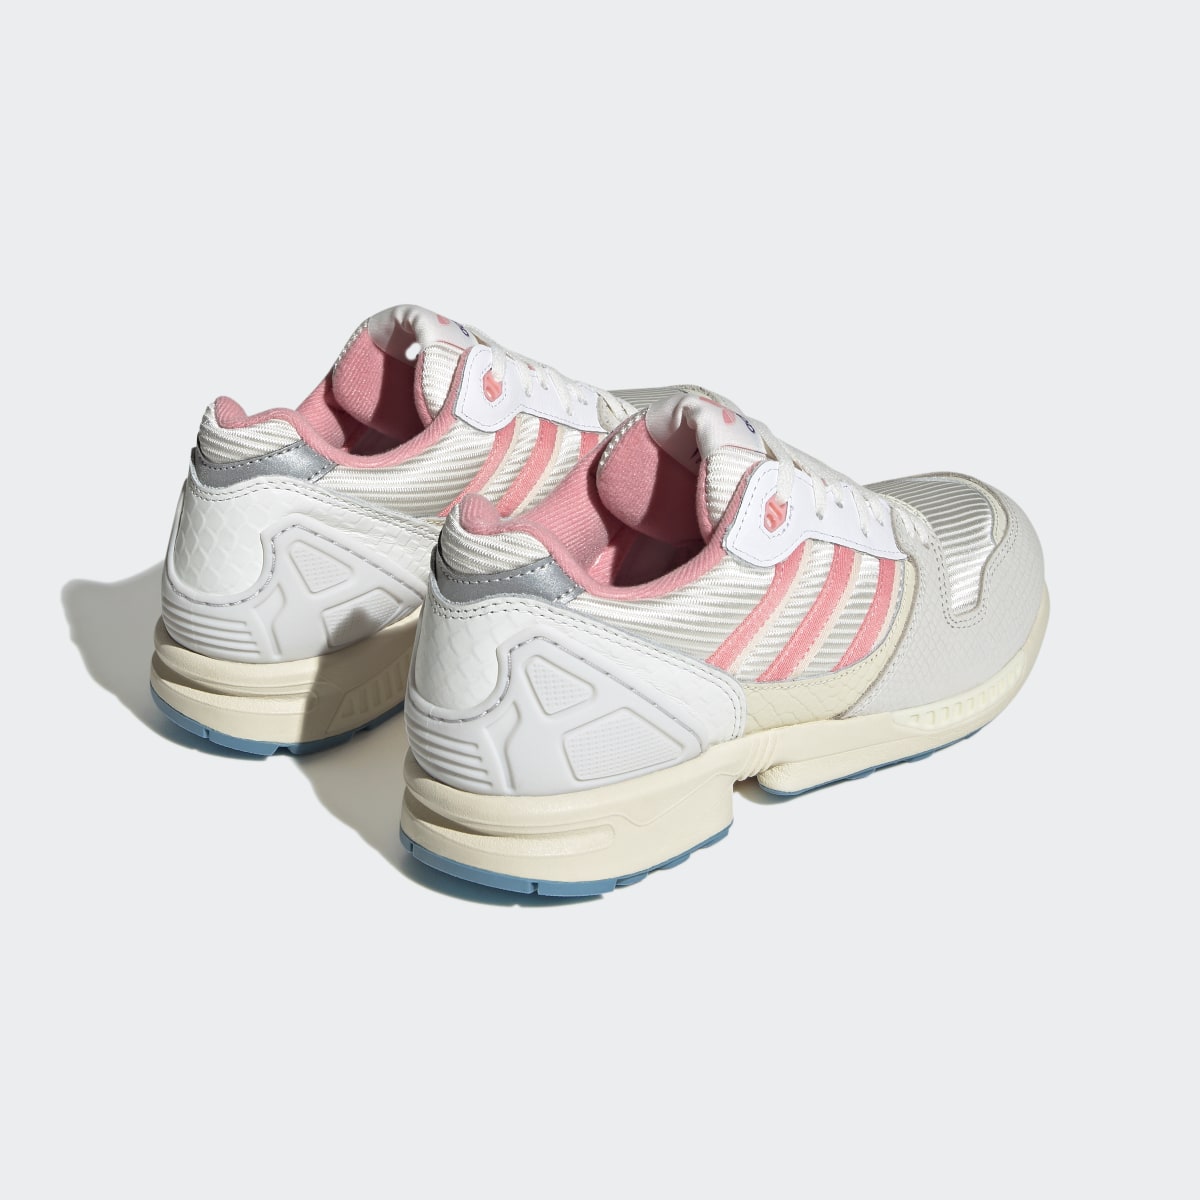 Adidas ZX 5020 Shoes. 6